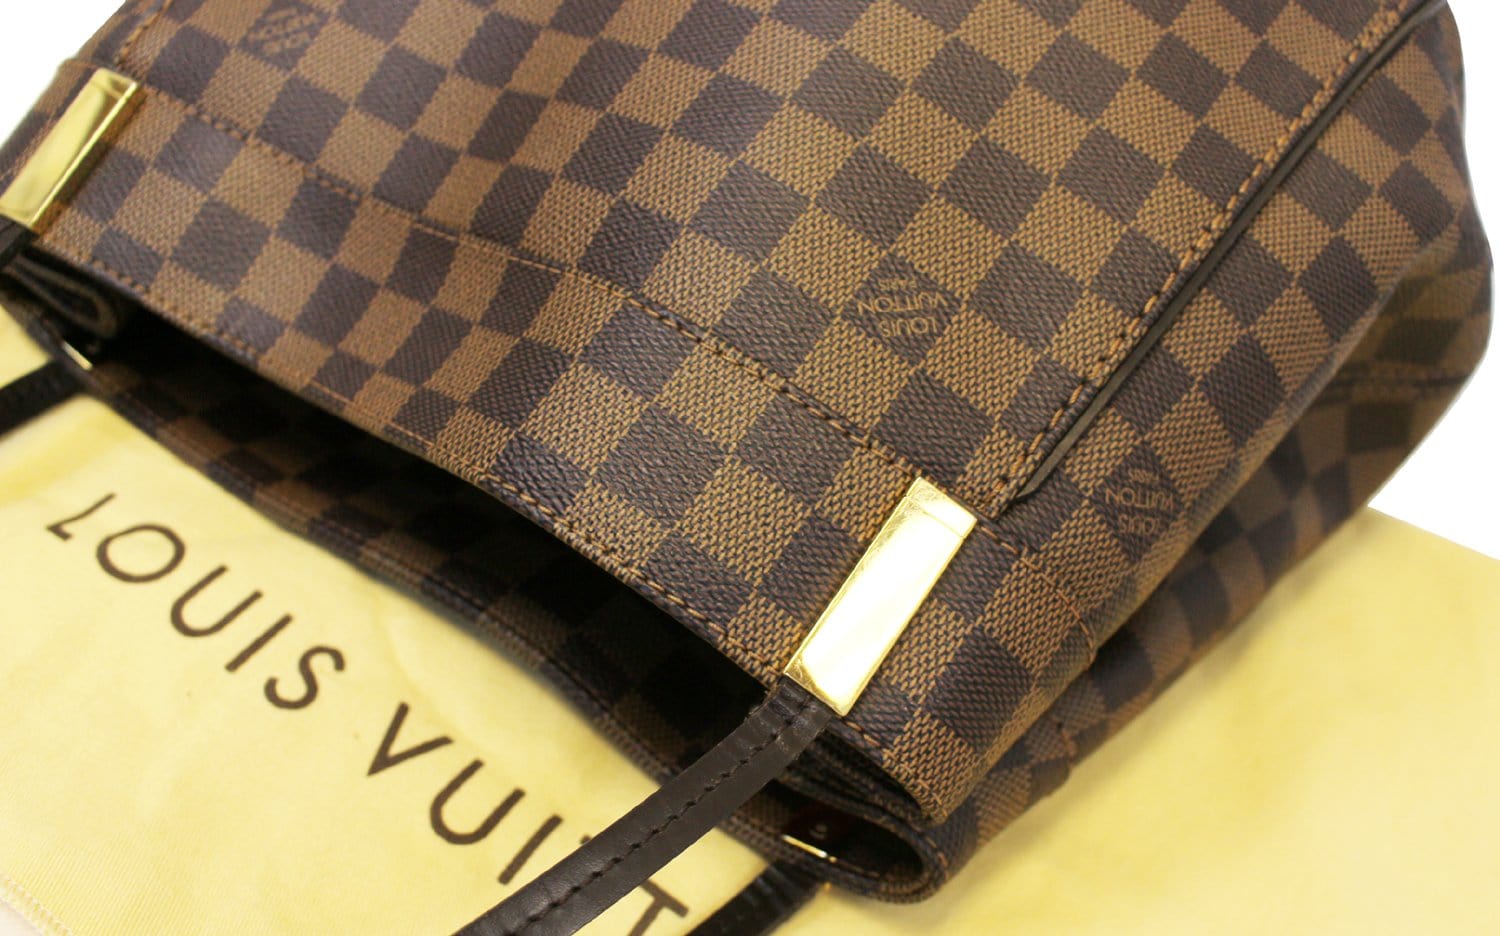 Louis Vuitton 2013 Pre-owned Marylebone PM Tote Bag